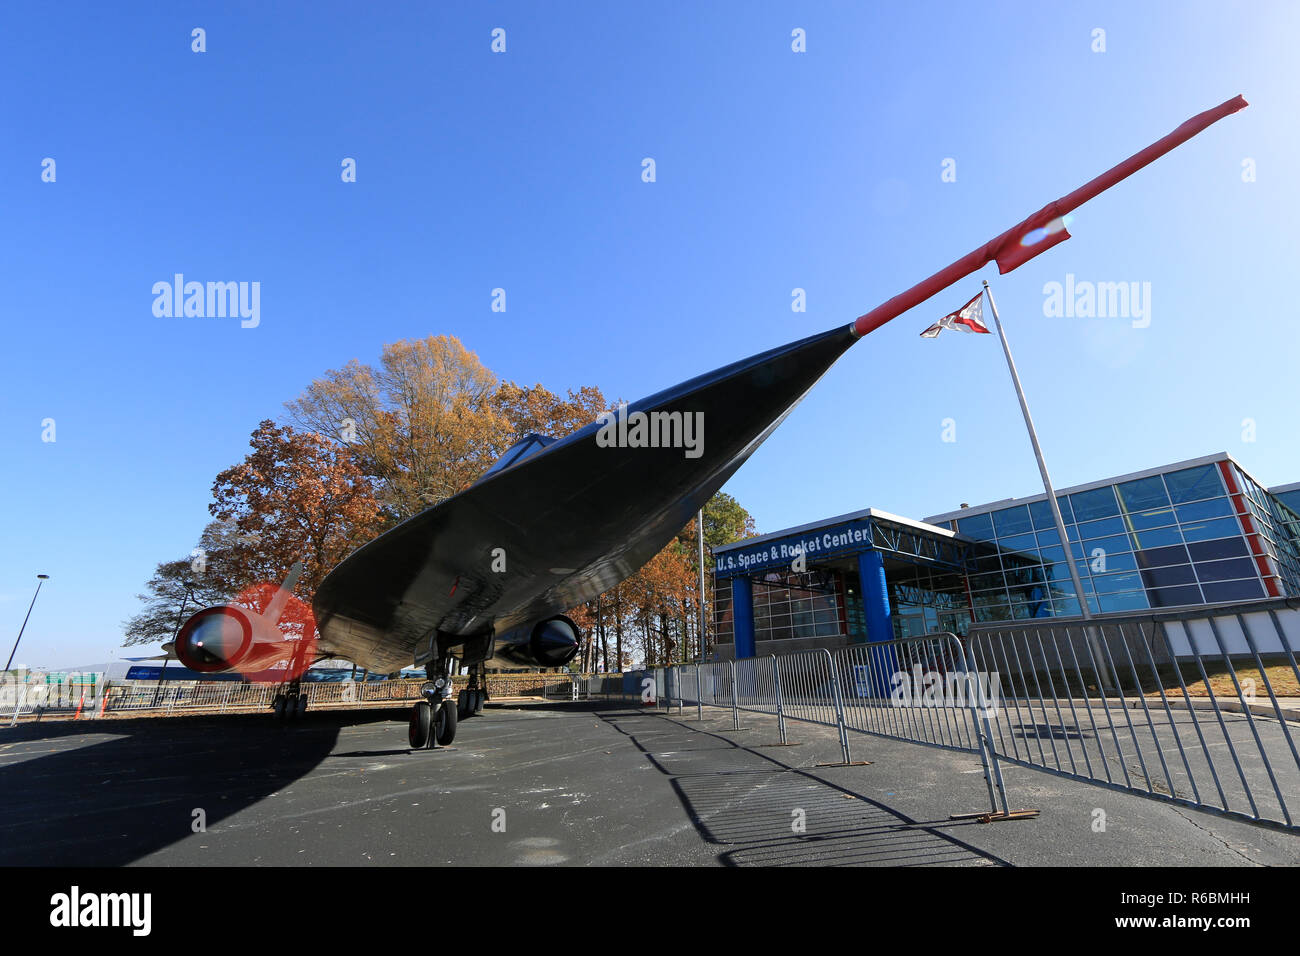 Lockheed SR-71 'Blackbird' Mach 3+ strategic reconnaissance aircraft at display in front of the main entrance of the U.S. Rocket and Space Center Stock Photo